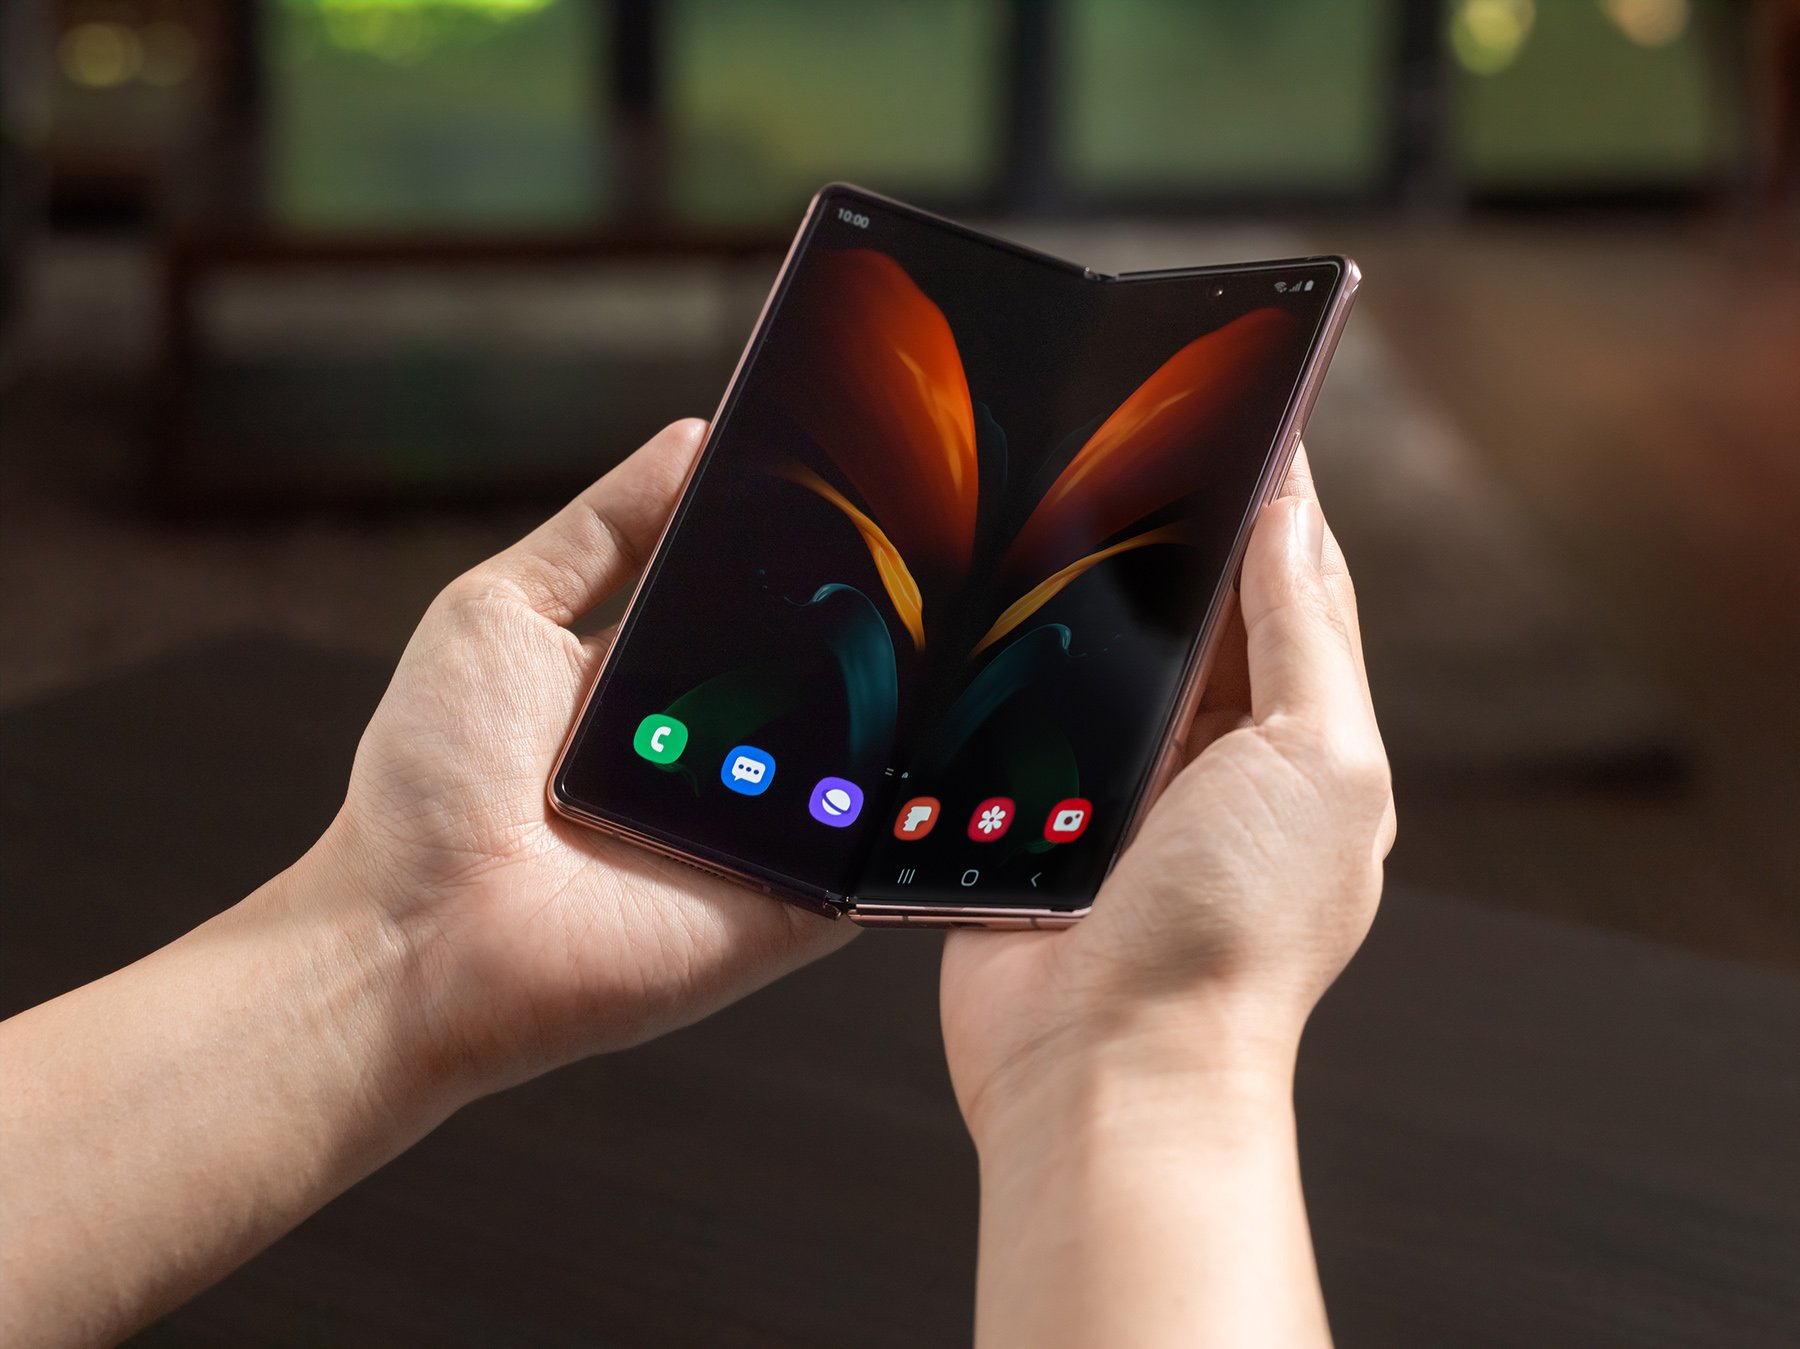 Over 5.1 million foldable and rollable phones expected in 2021 from 8 different brands: DSCC